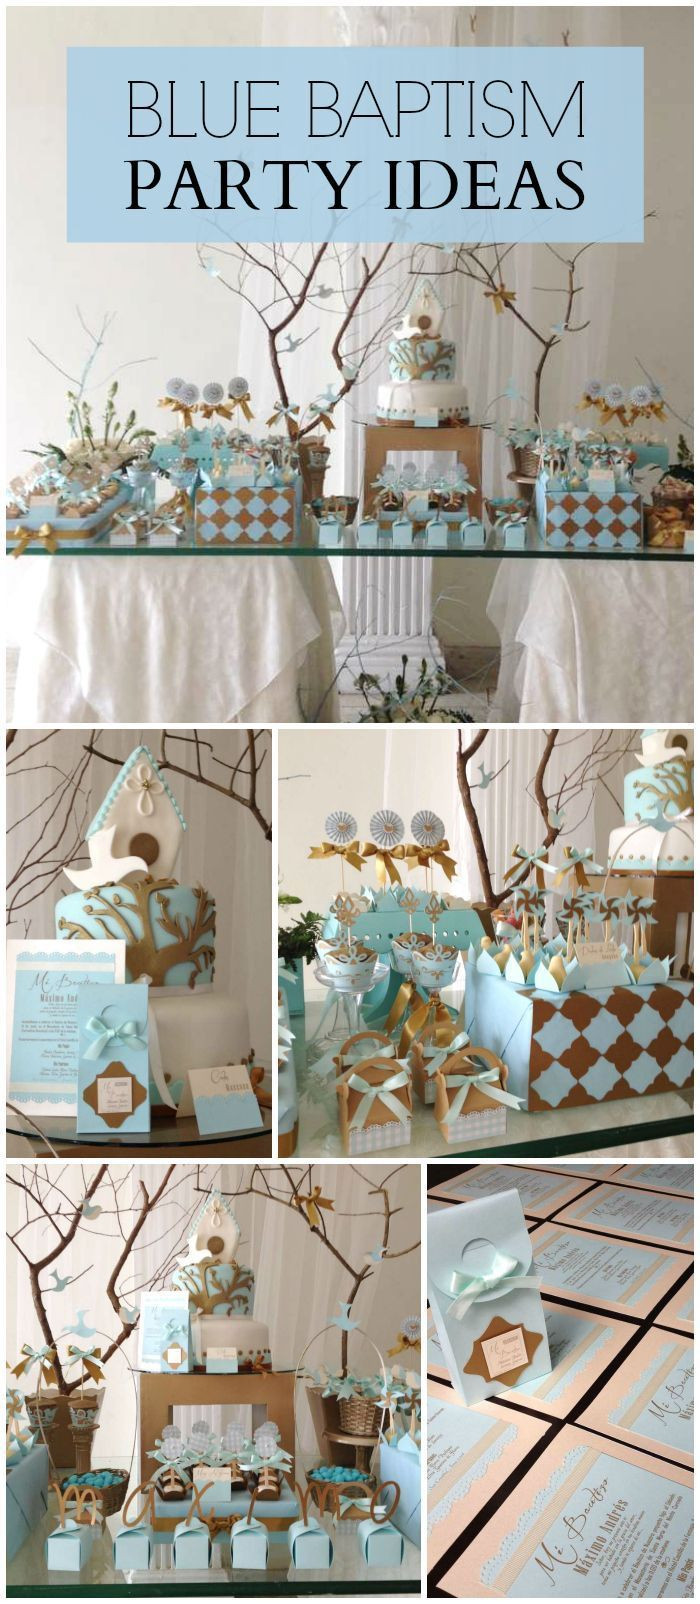 Baby Boy Christening Party Ideas
 Vintage Gold Baptism "Baptism of a baby boy"